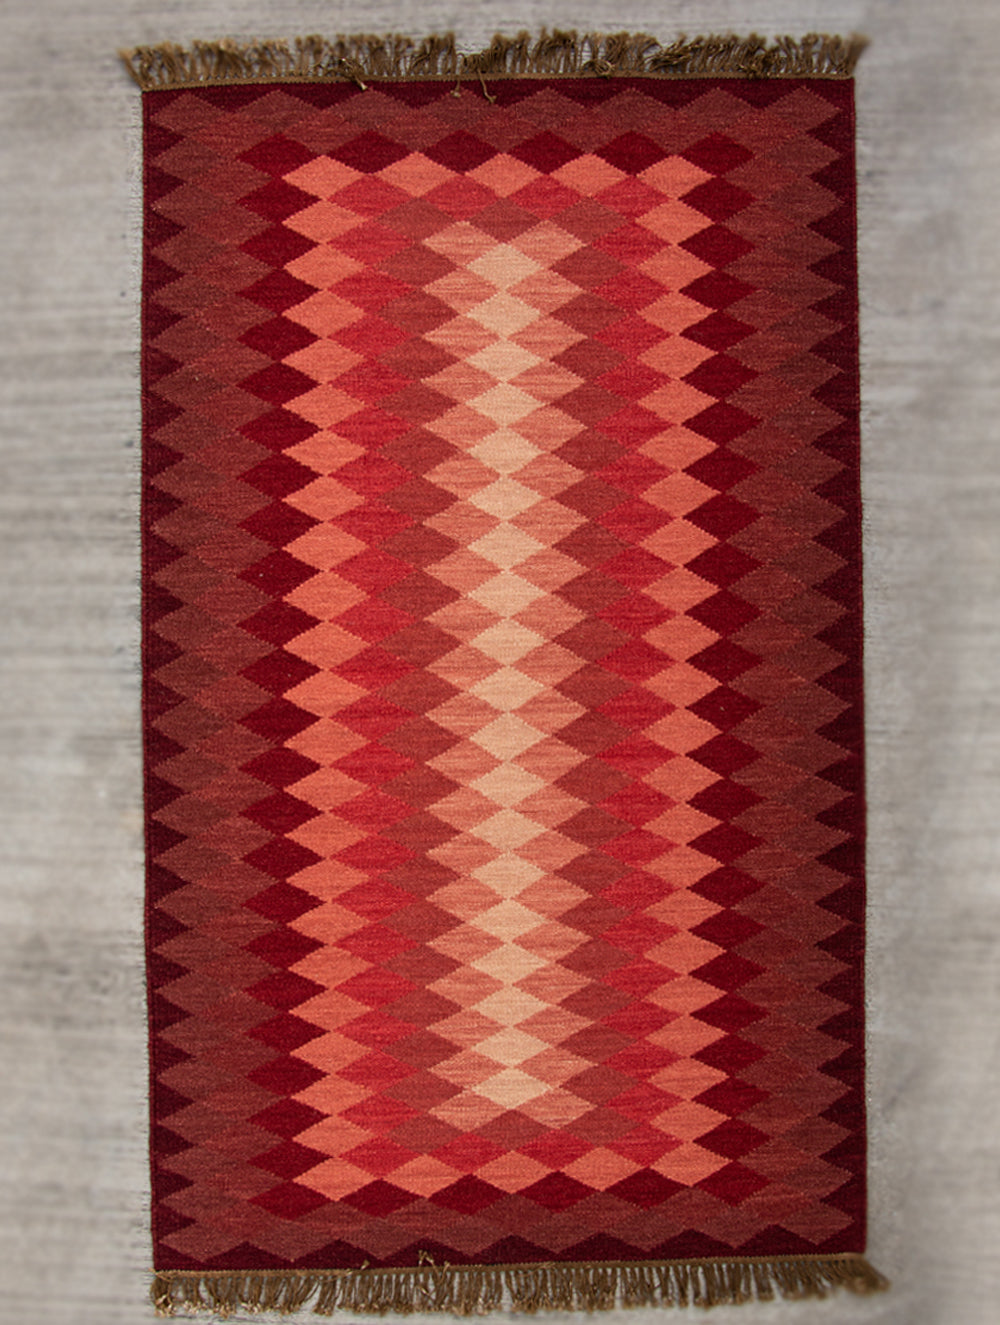 Load image into Gallery viewer, Handwoven Kilim Rug (8 x 5 ft) - Zigzags - The India Craft House 